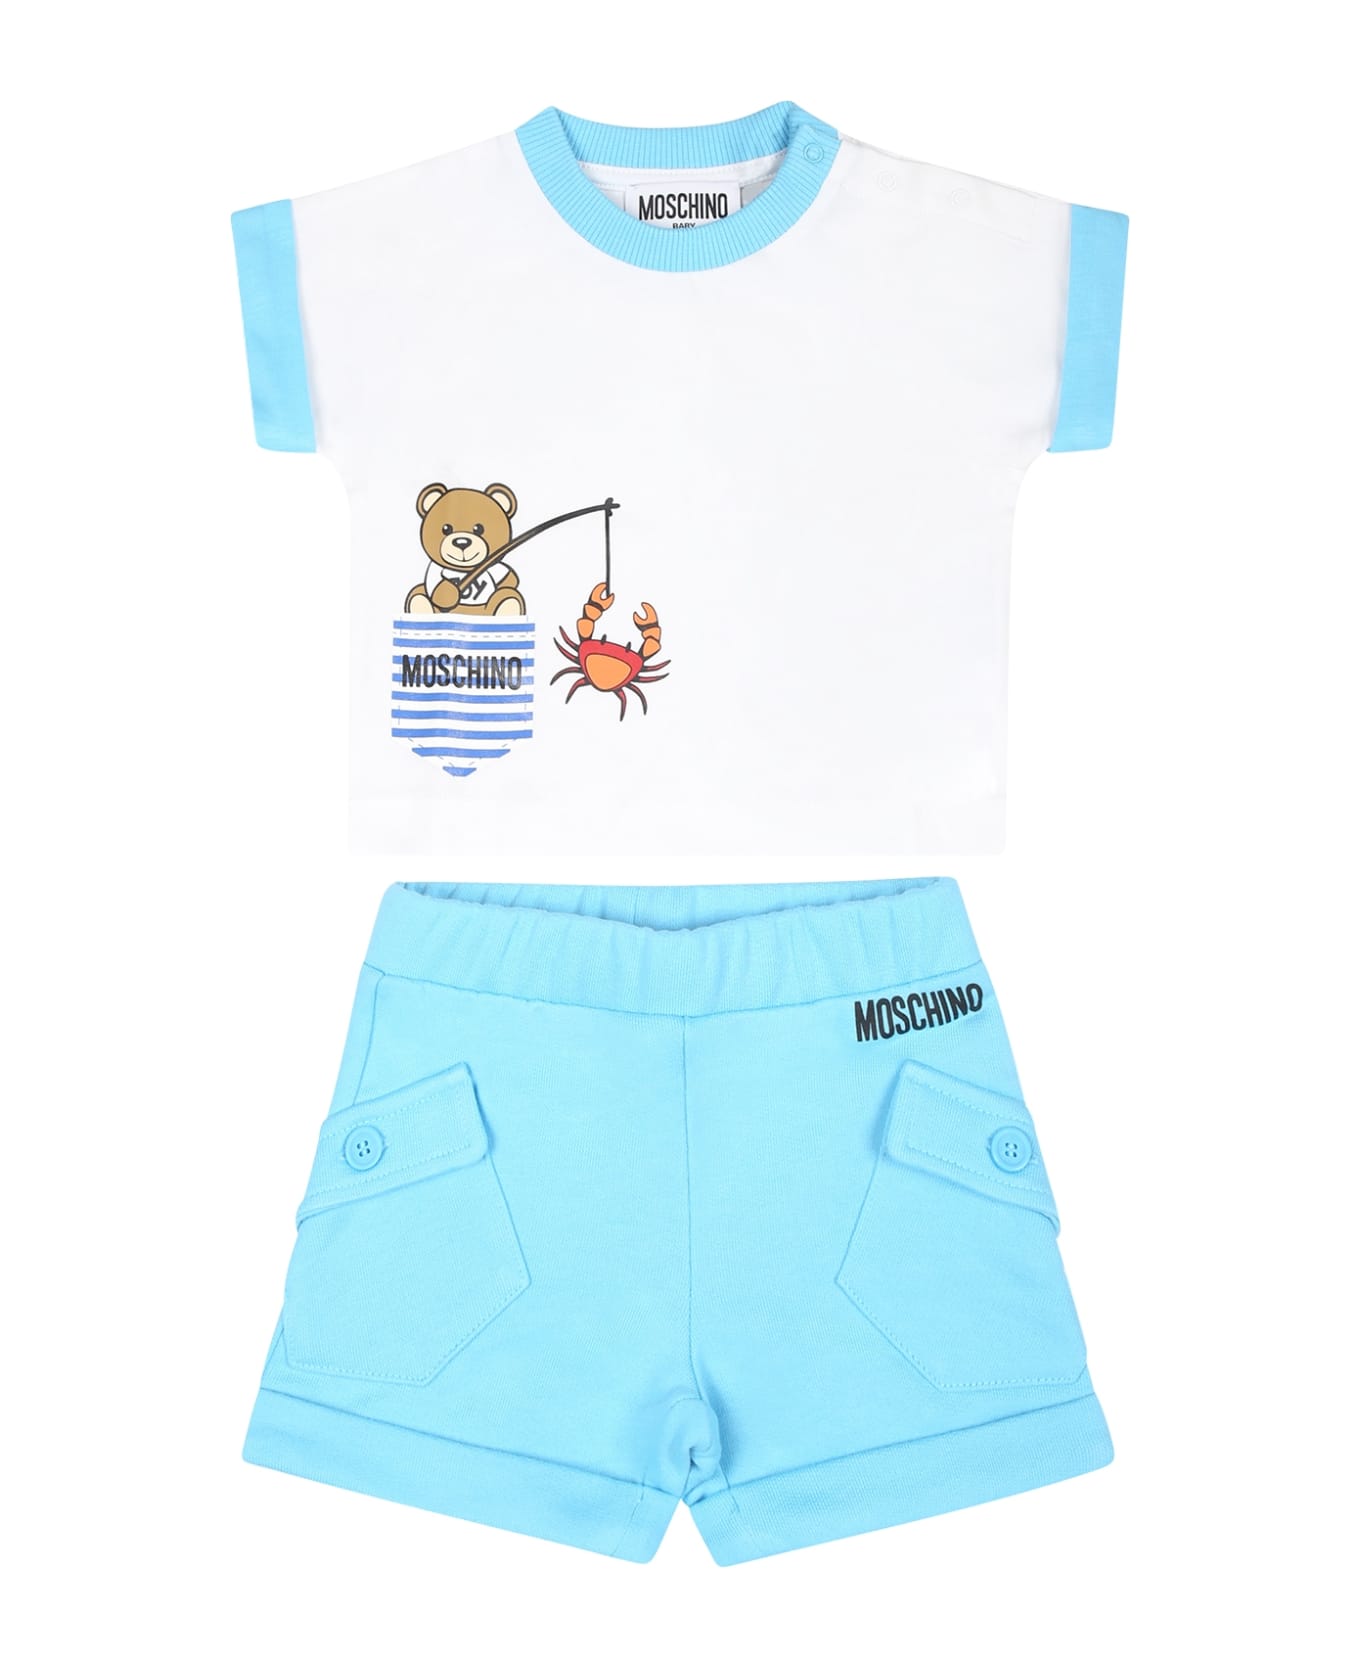 Moschino Light Blue Suit For Baby Boy With Teddy Bear - White ボトムス